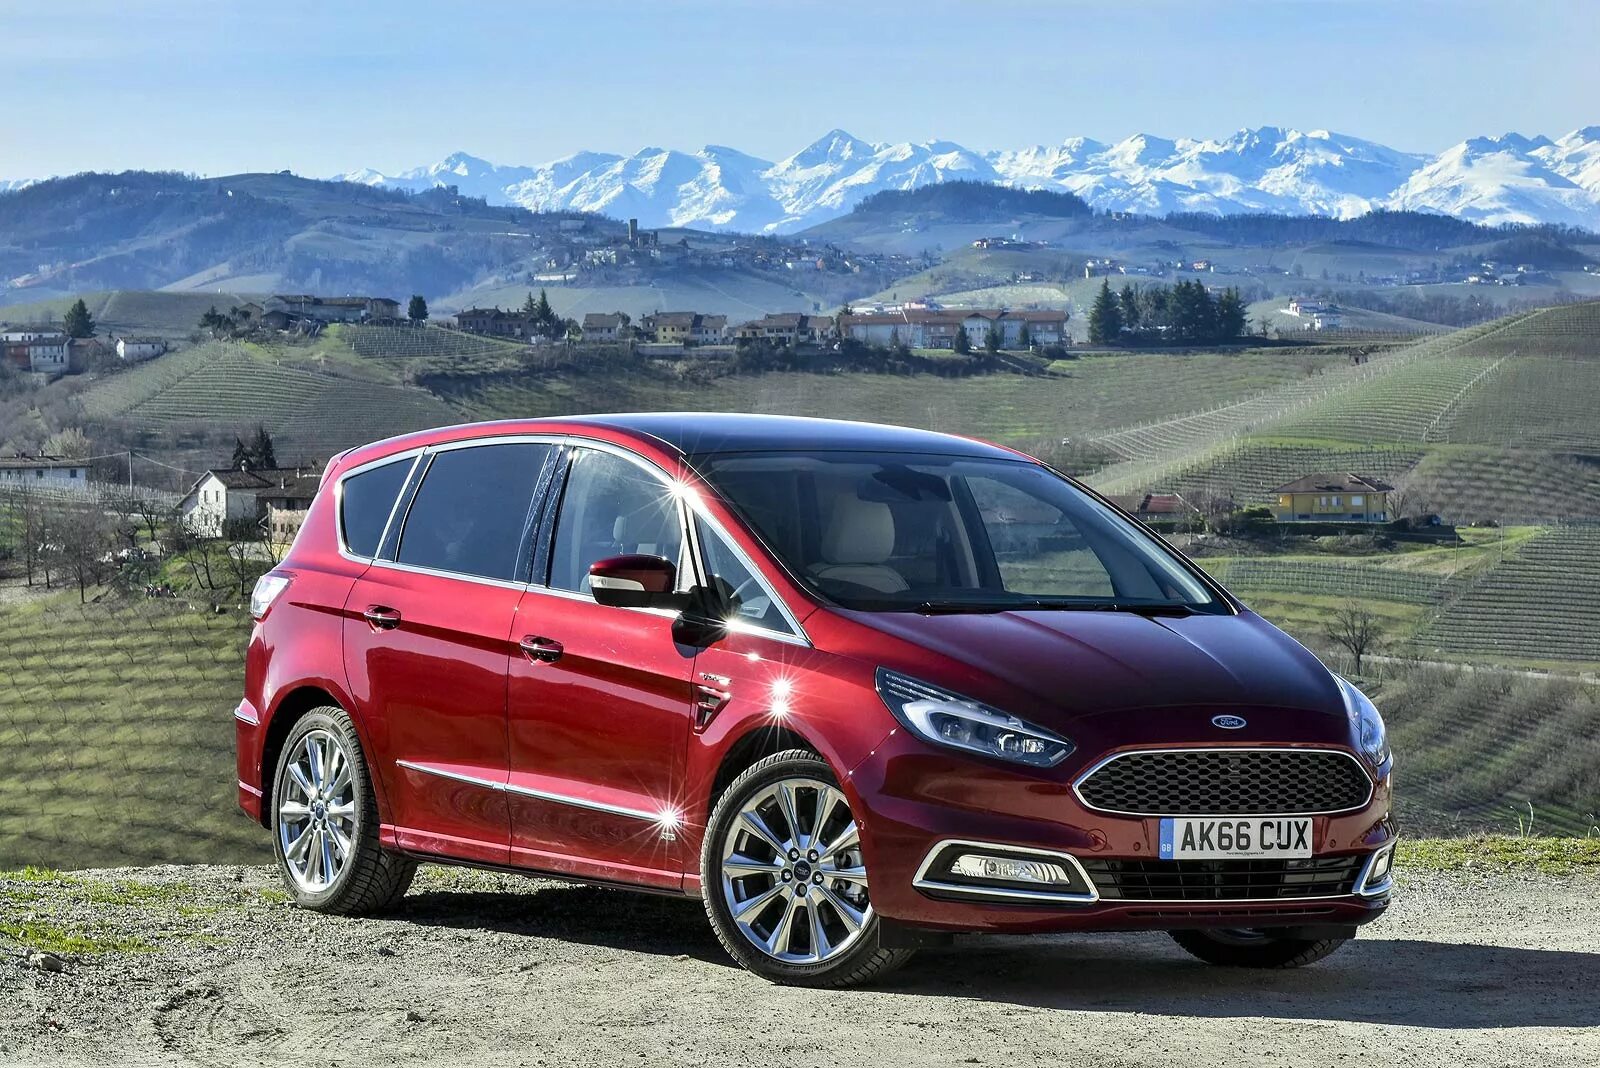 Форд s max. Ford s Max 2017. Форд s Макс 2016. Ford s Max 2021. Ford s Max 2018.